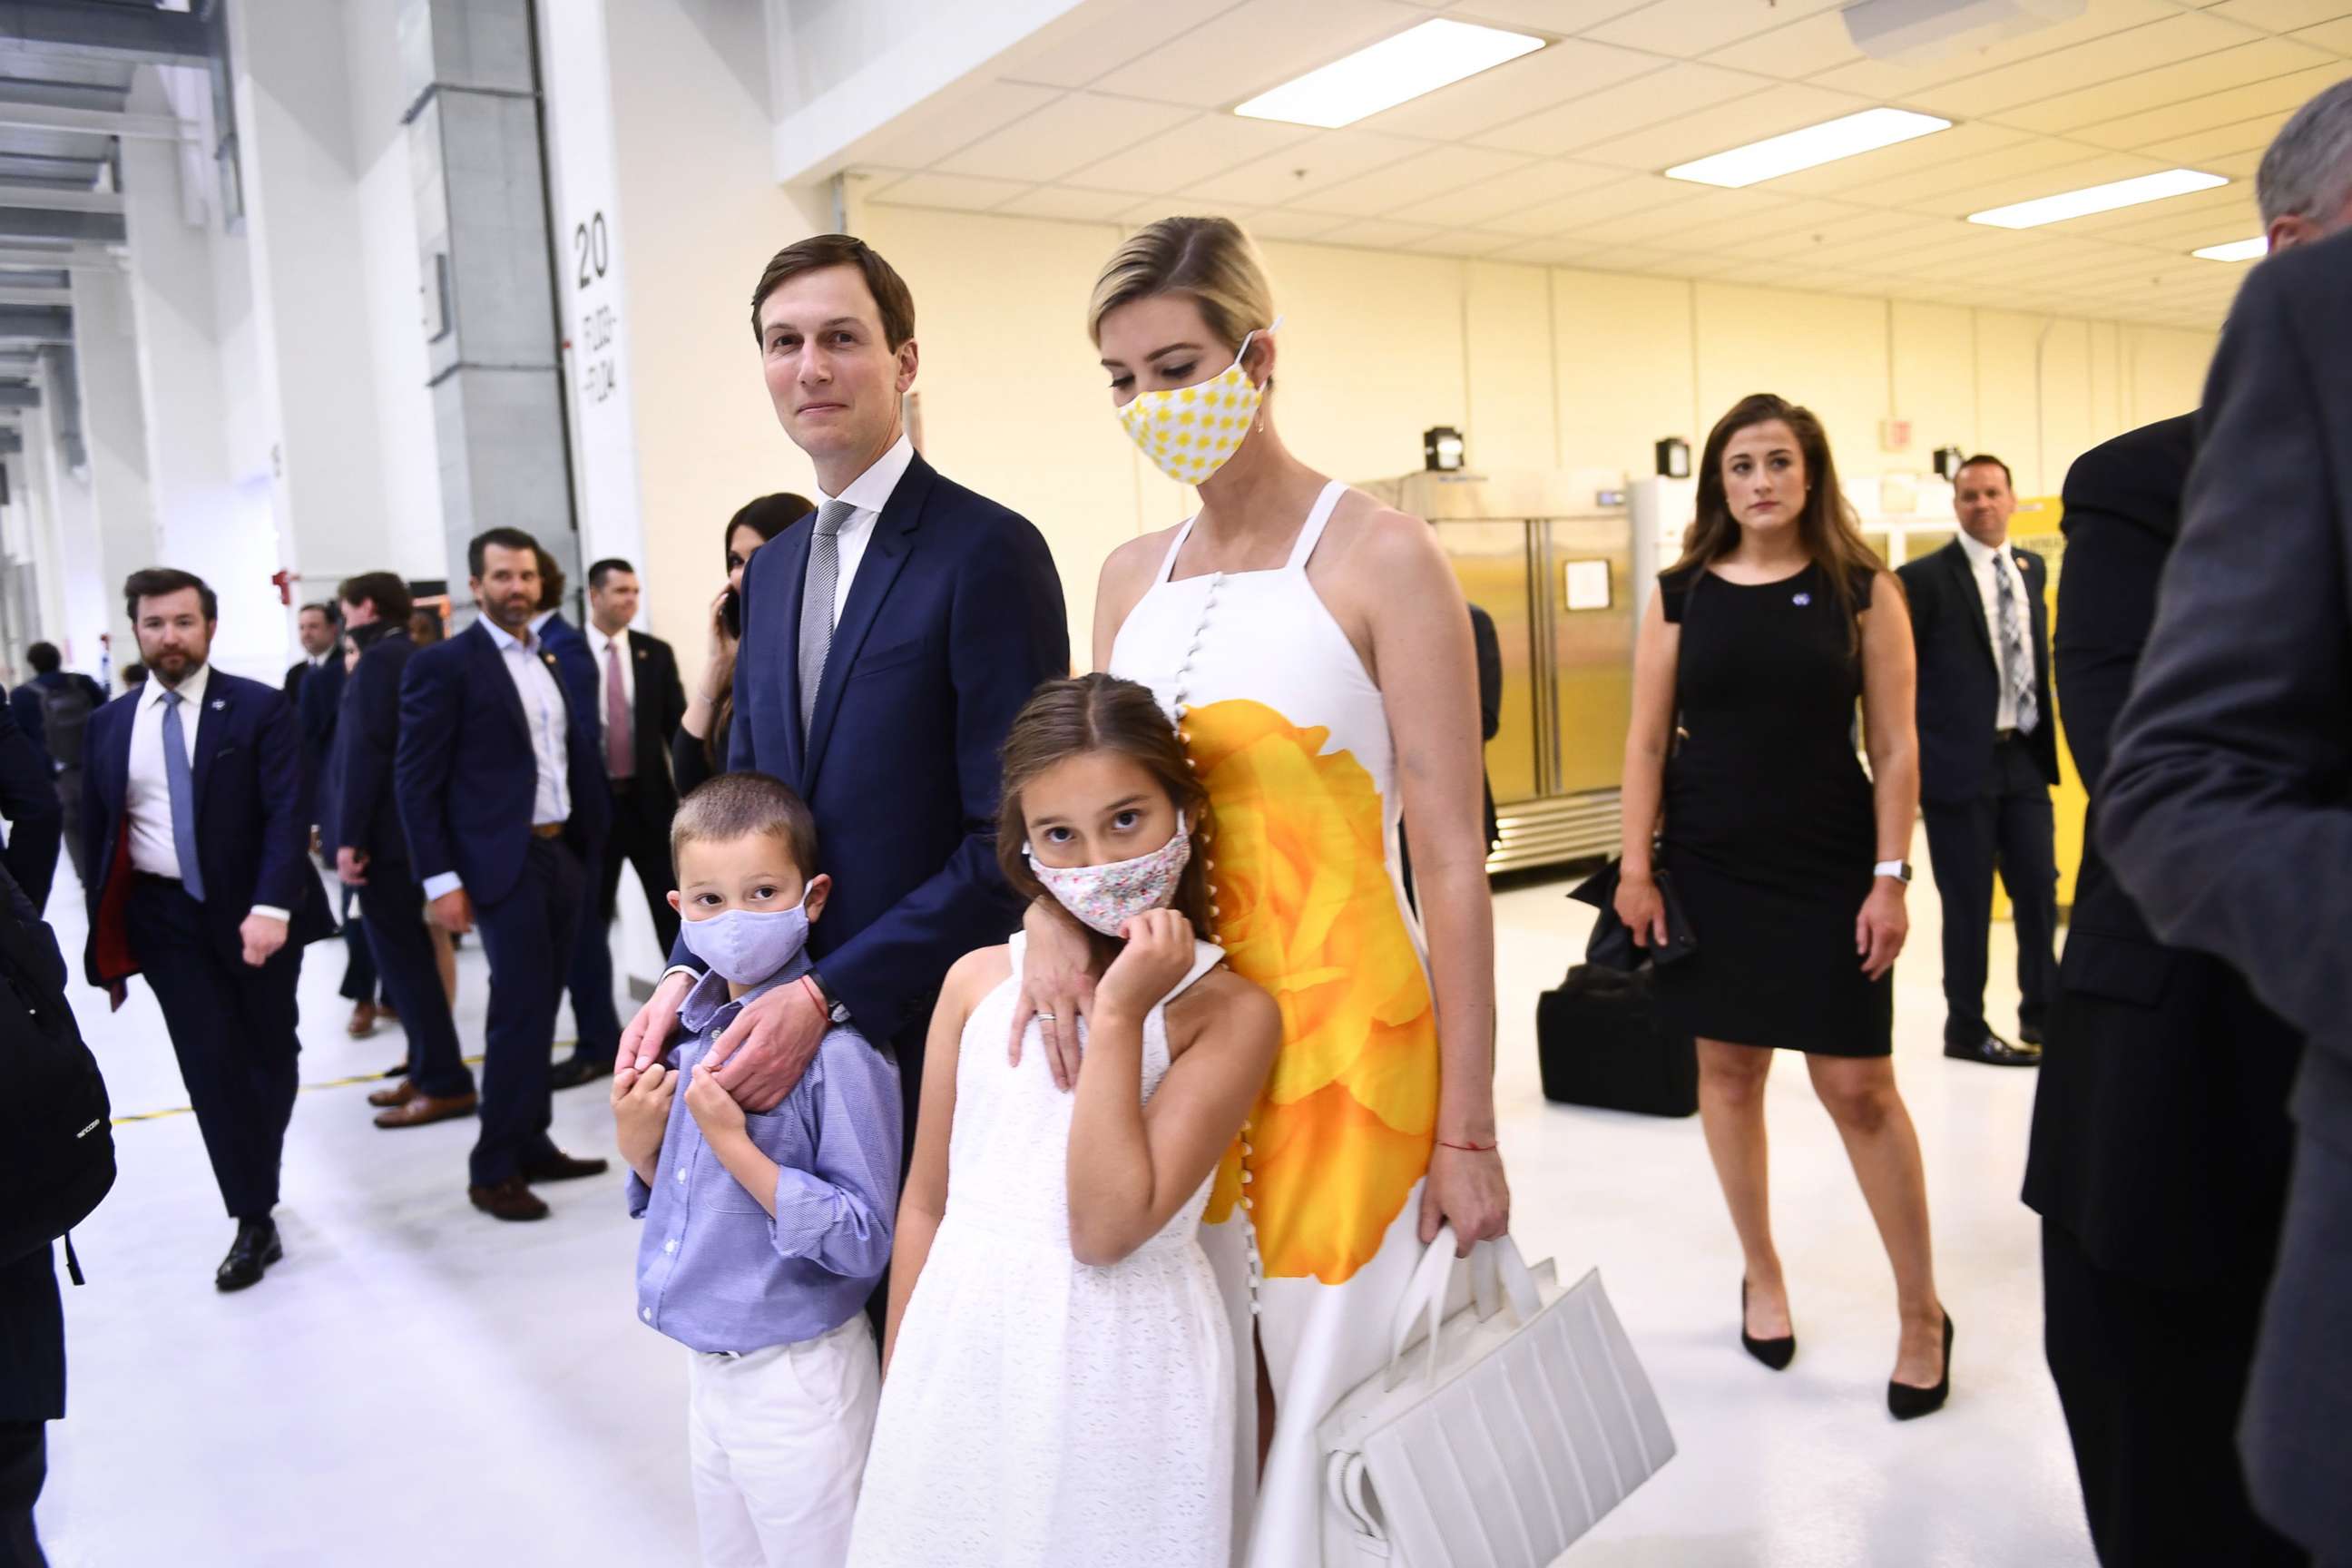 PHOTO: Senior Advisors to the President Jared Kushner and Ivanka Trump, with their children, arrive at the Kennedy Space Center in Florida on May 27, 2020, to watch the launch of the SpaceX Falcon 9 rocket.